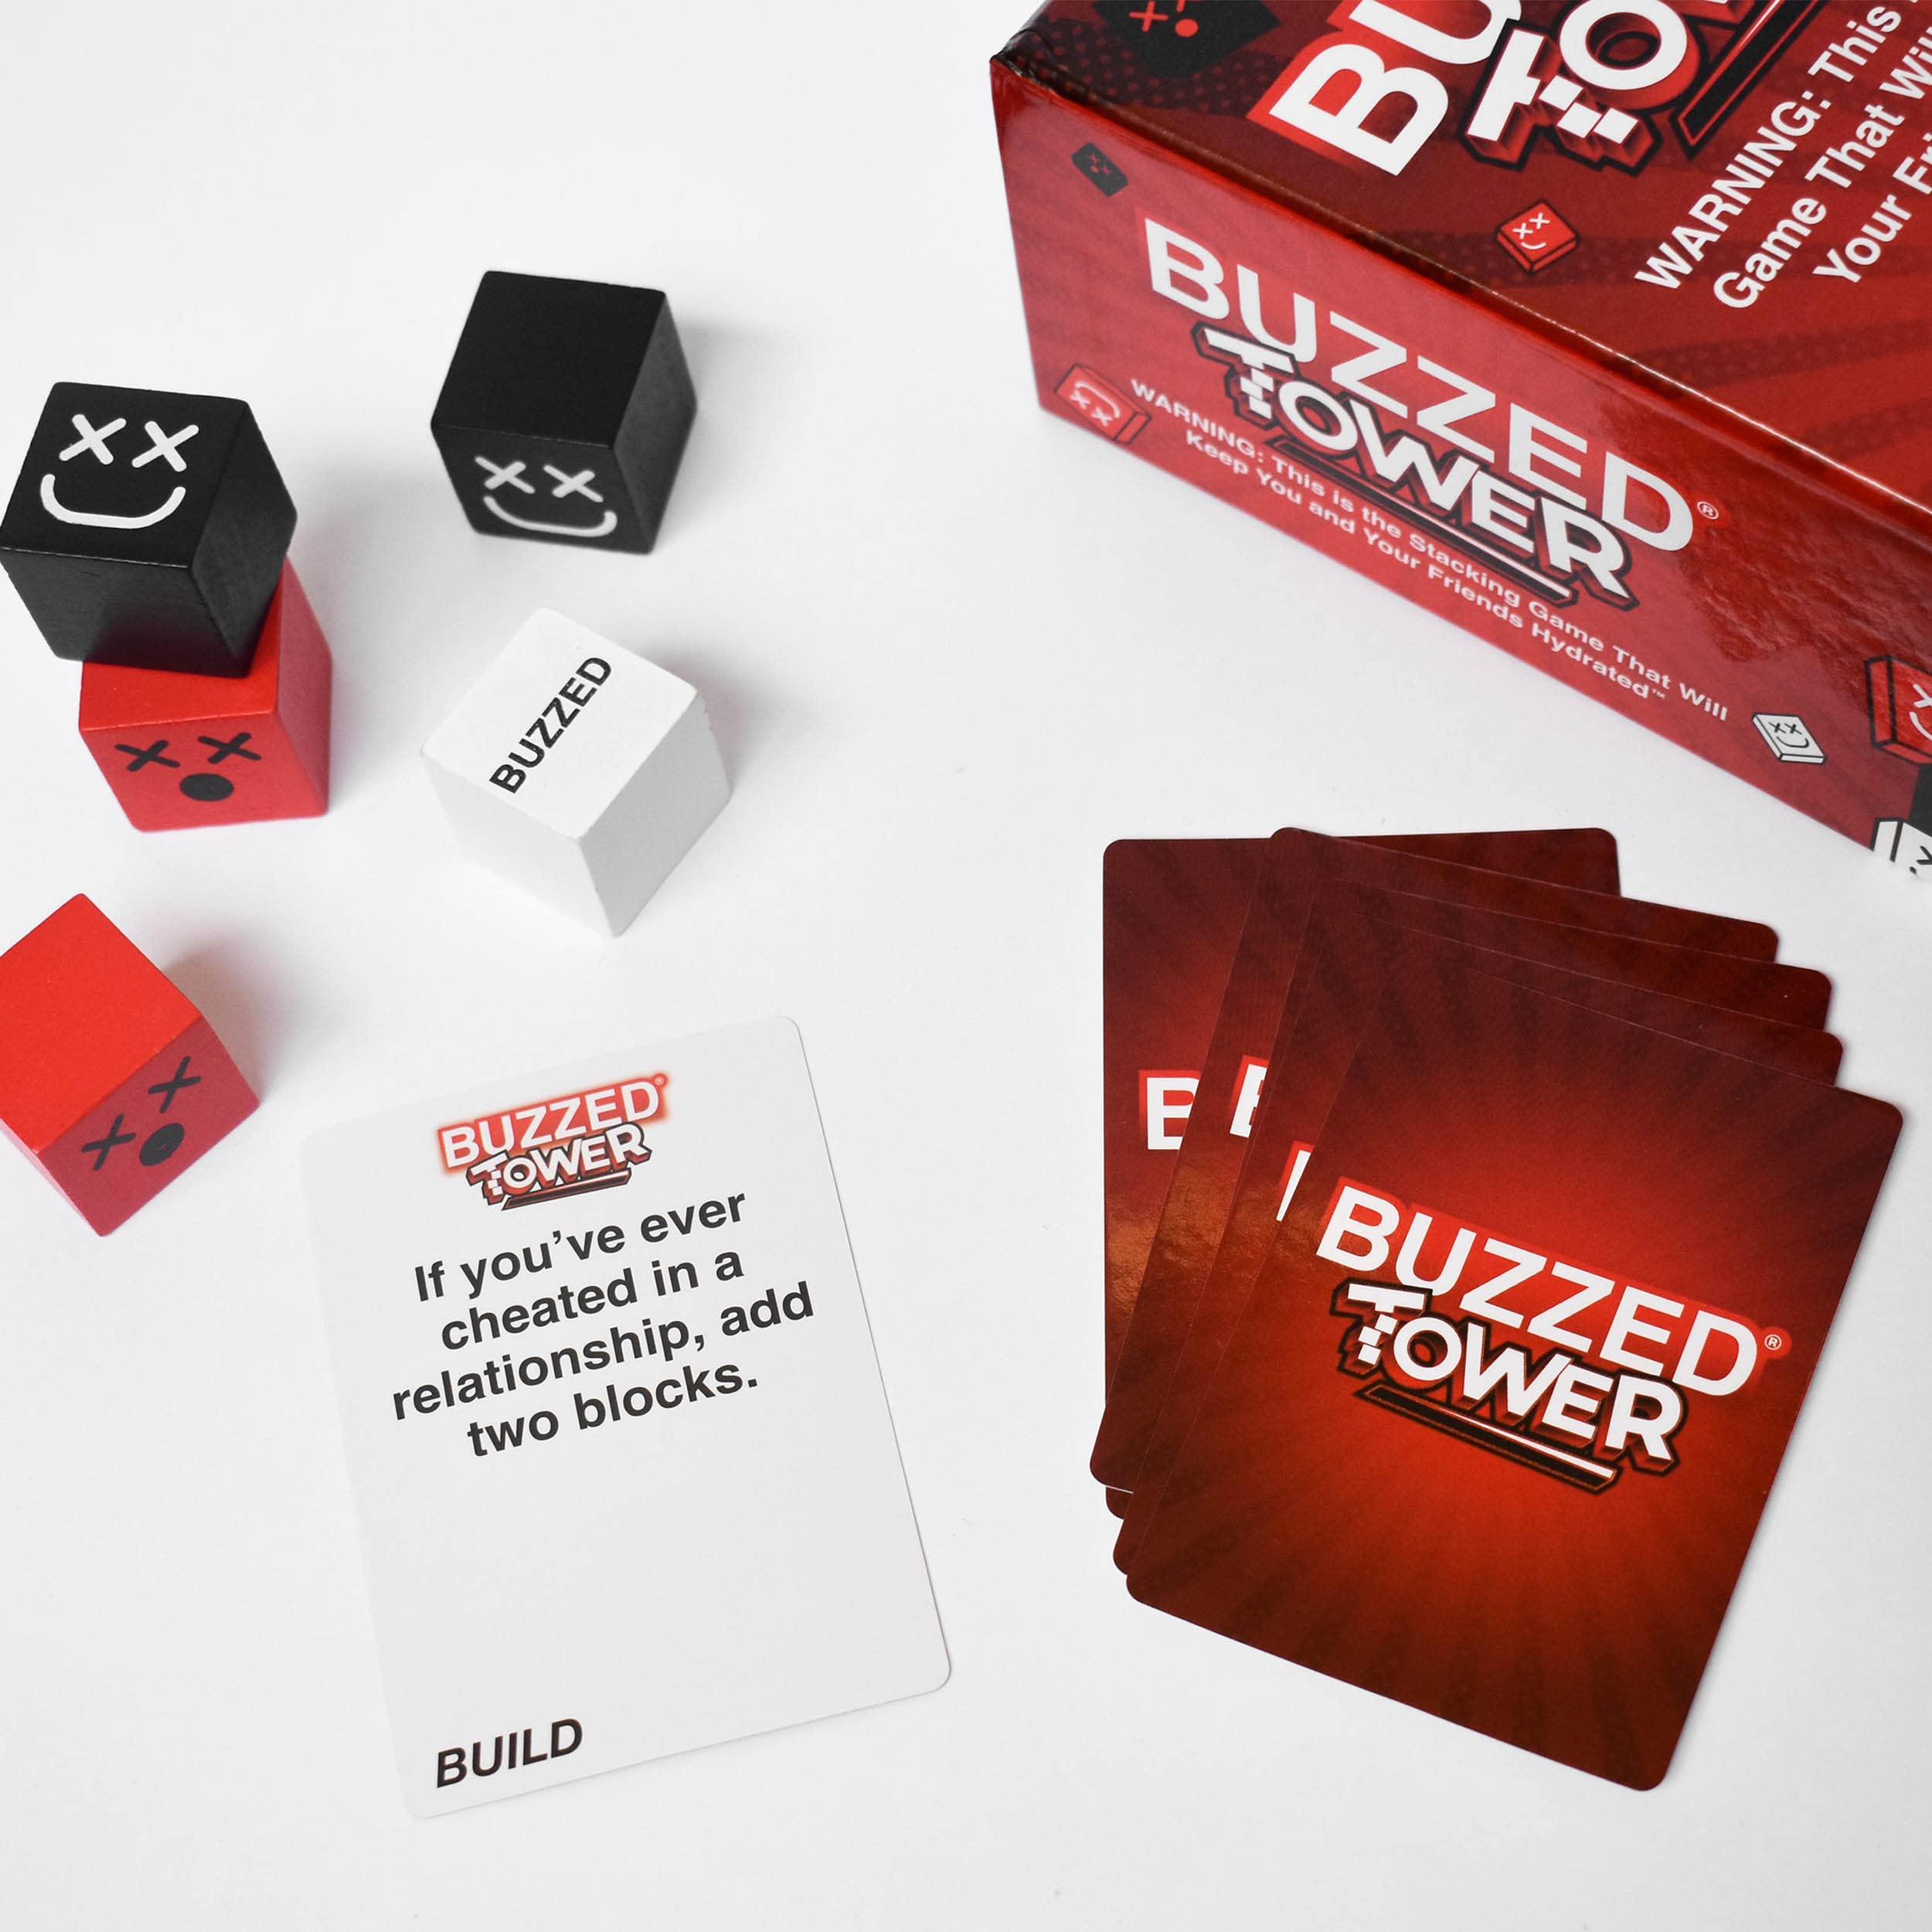 WHAT DO YOU MEME? Buzzed Tower - The World's Most Constructive Drinking Game for The Summer Party Activities, BBQ Party Games & More